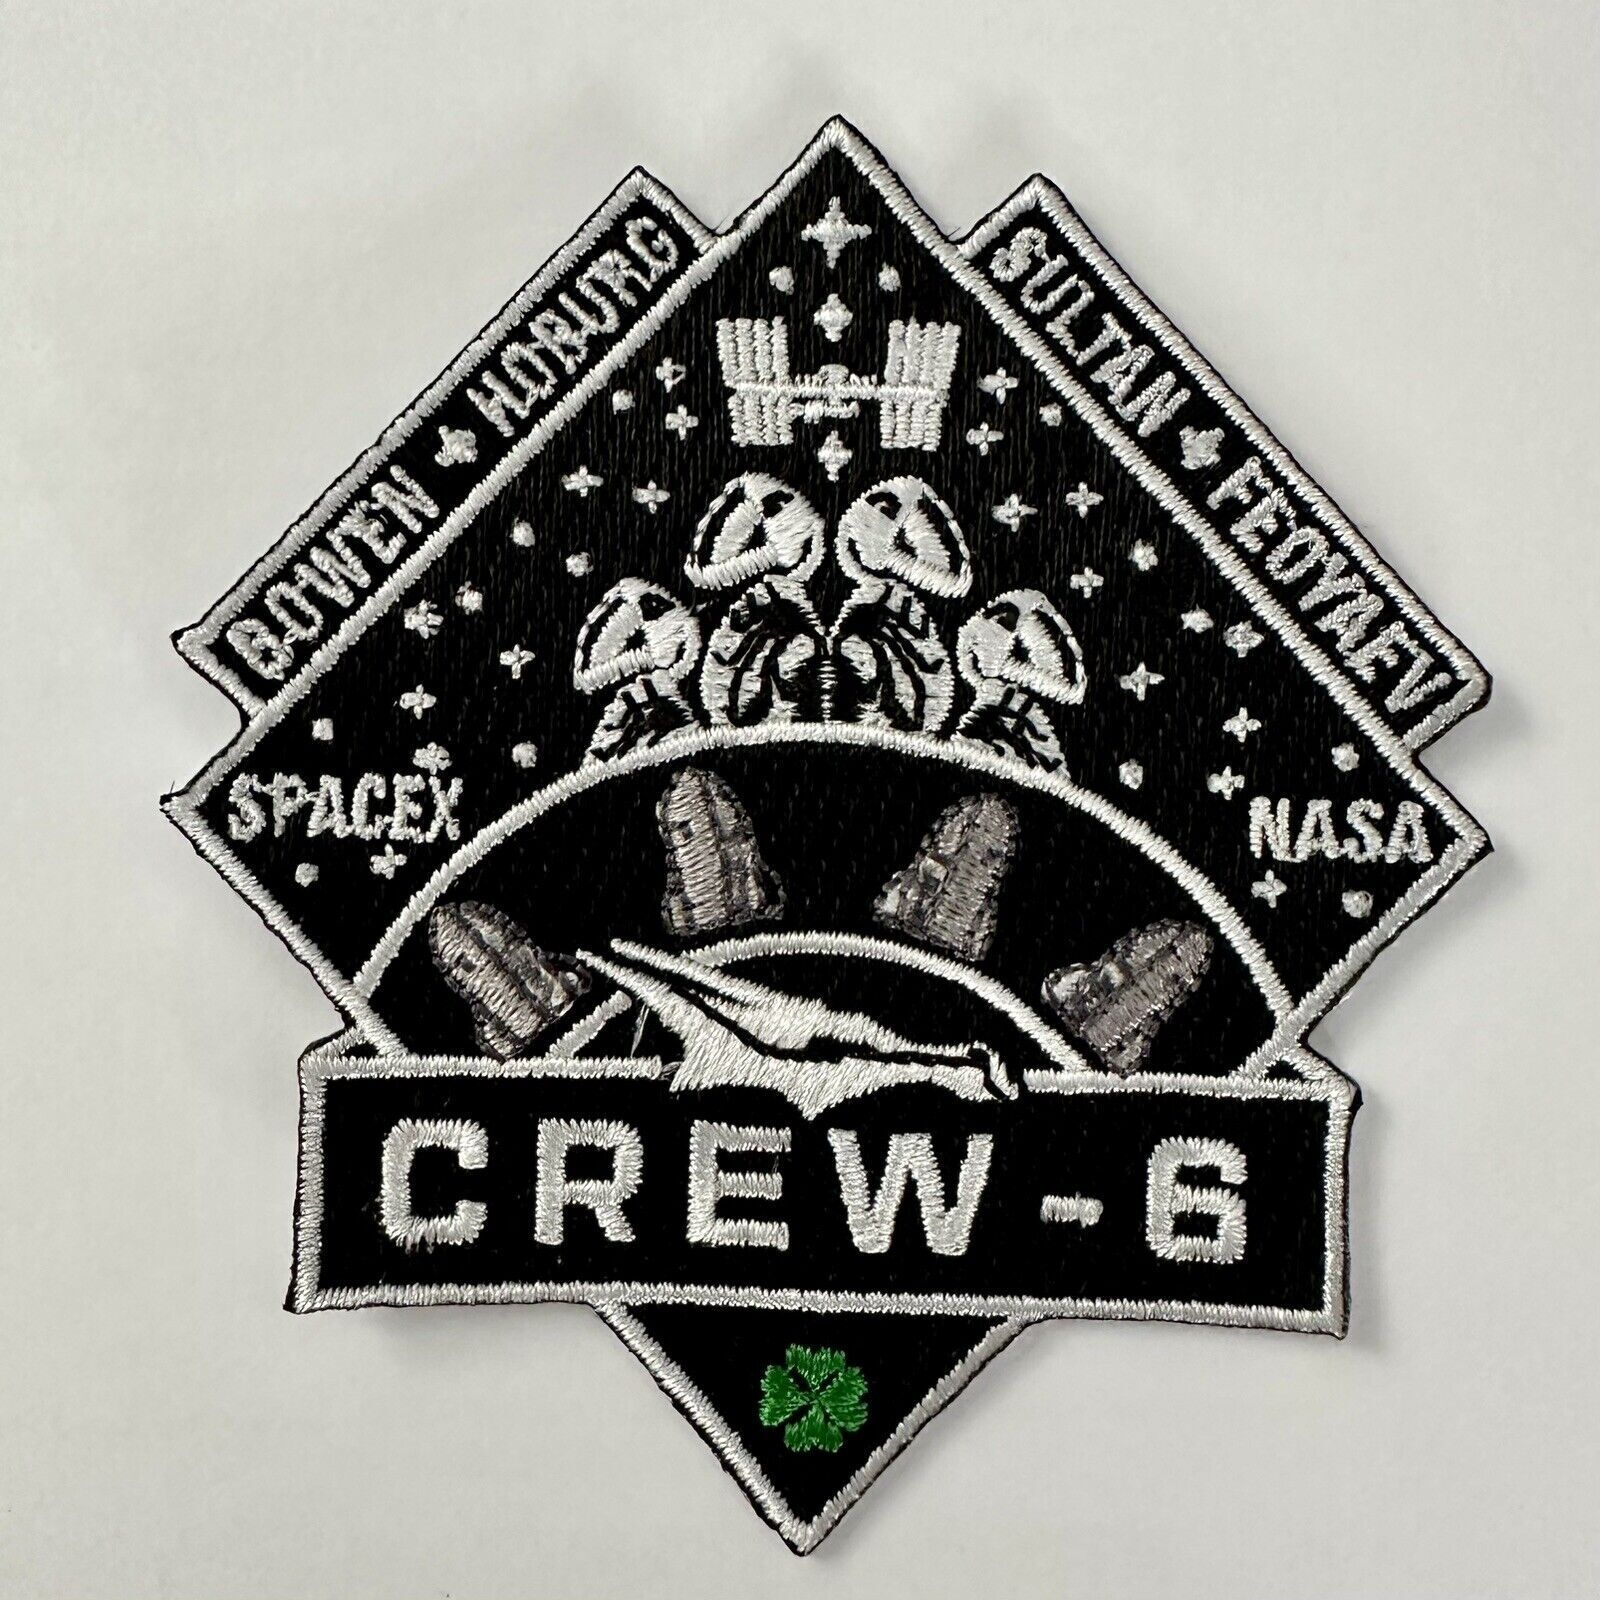 OrIginal NASA SPACEX CREW- 6 FALCON 9 ISS MISSION CREW DRAGON SPACE PATCH